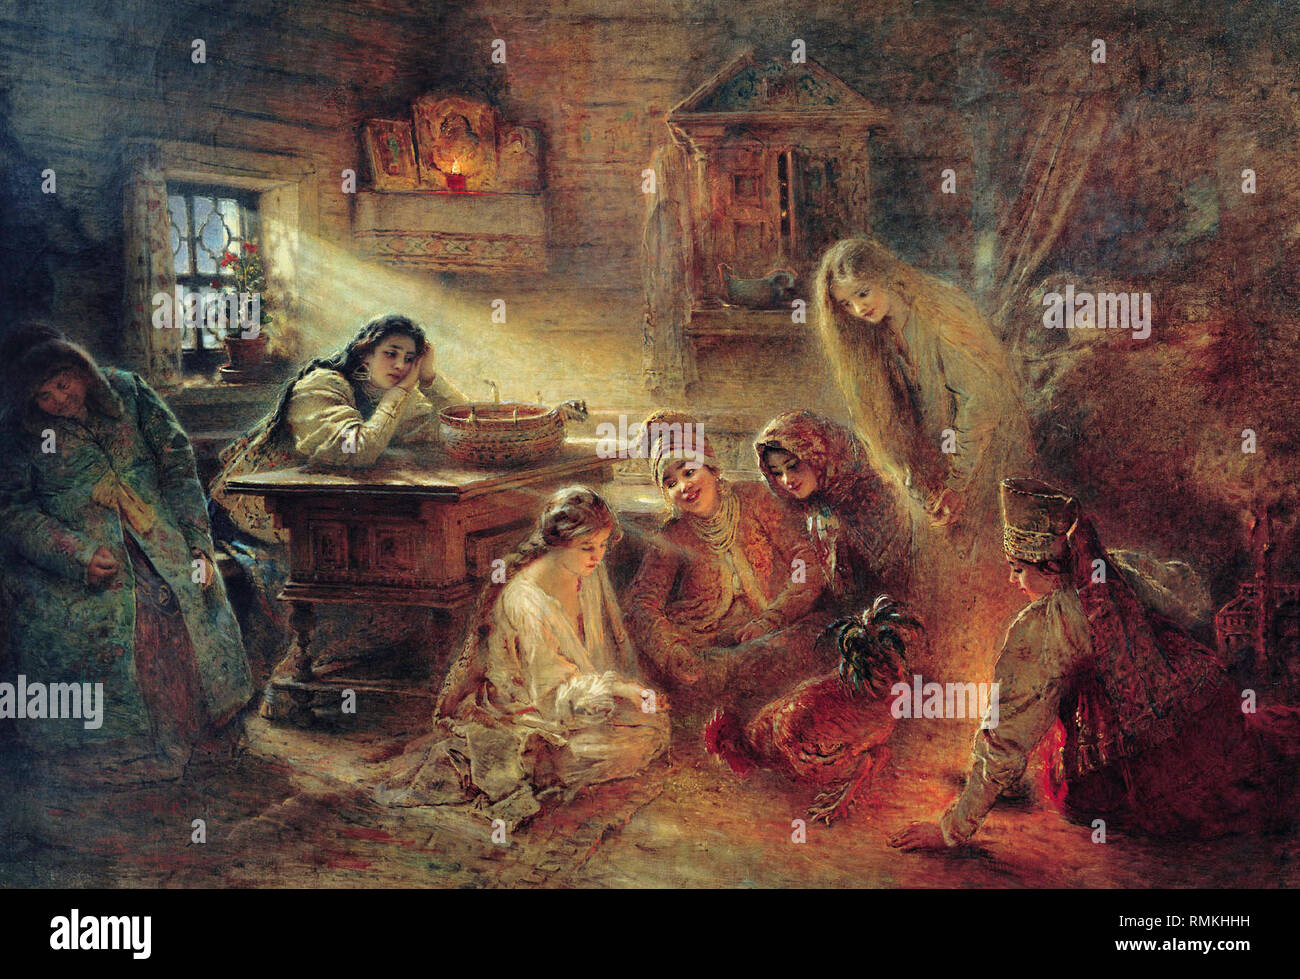 Russian: Christmas divination  In the interior of the village hut six girls are guessing: five of them gathered around a rooster pecking grain near the girl sitting on the left, which should foreshadow her soon marriage. To the left of the window, the girl sits at the table, on the table is water and candles. Nearby on the bench is a sleeping elderly woman. Konstantin Makovsky, circa 1905 Stock Photo